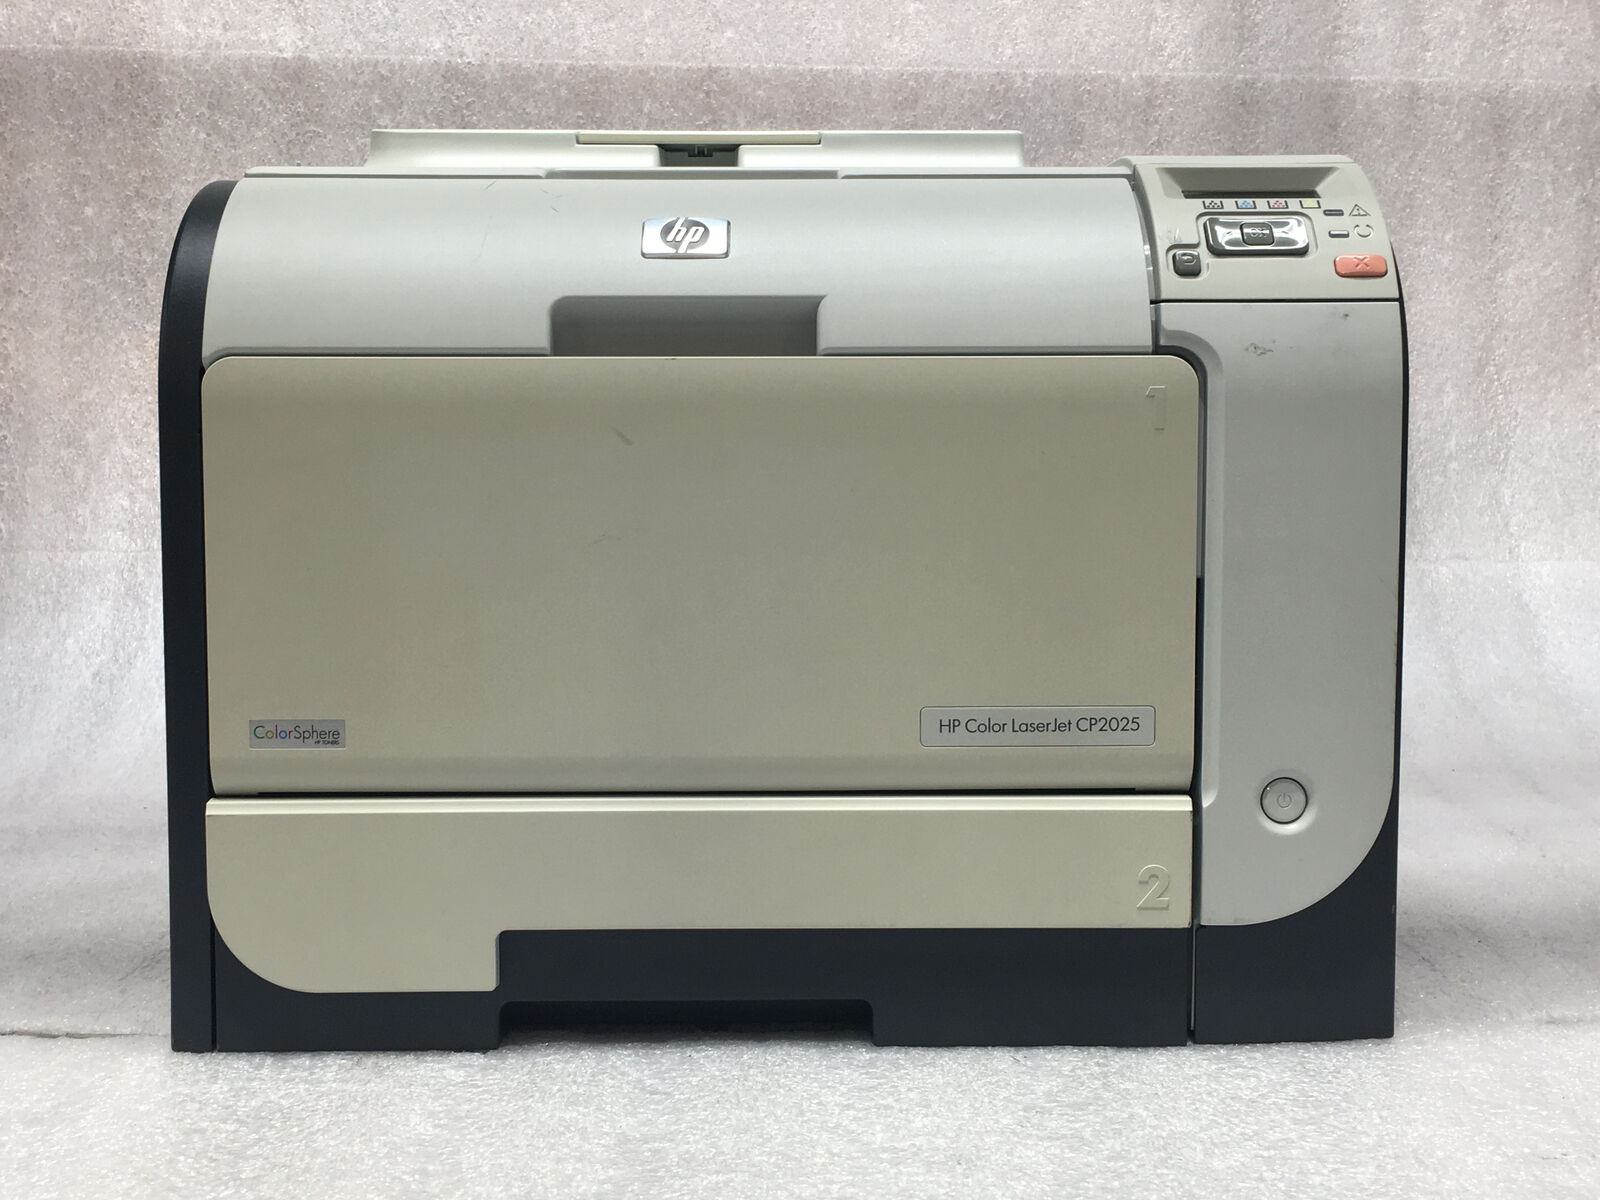 HP LaserJet CP2025dn Workgroup Laser Printer w/ ONLY 1792 Pages Printed & Toner